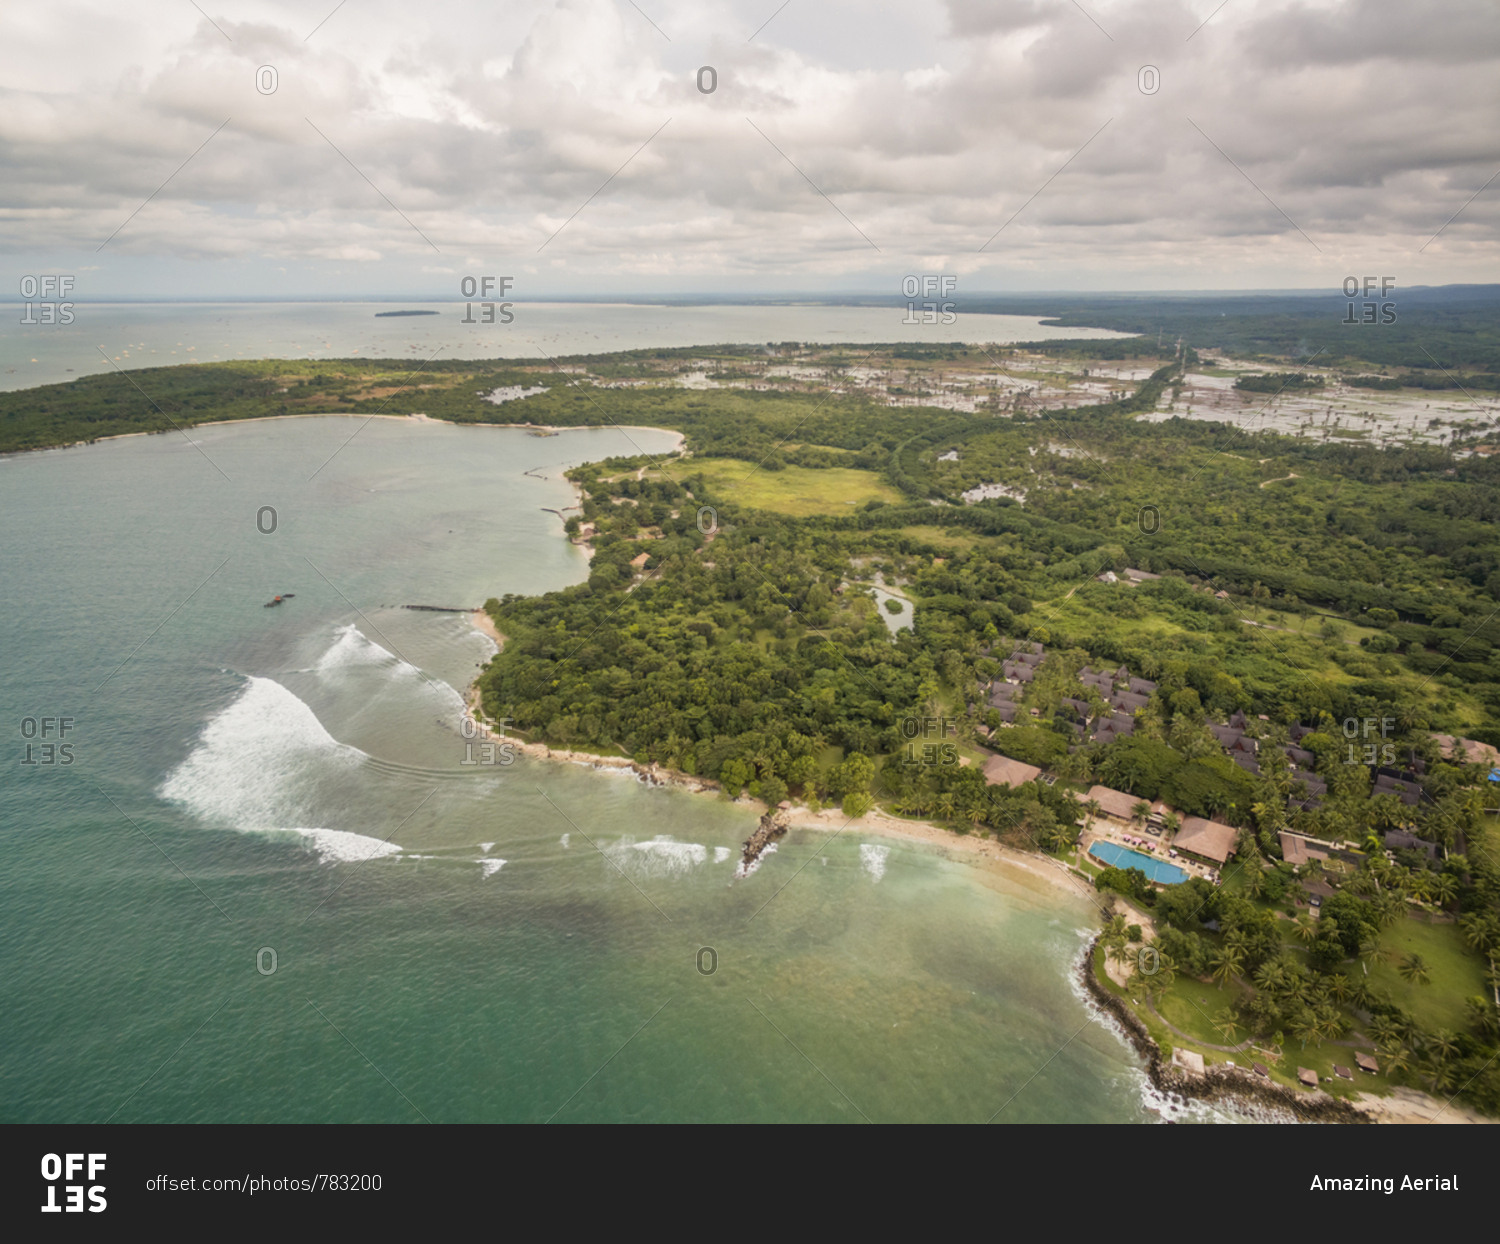 Aerial view of tropical island with a resort, Java, Indonesia.